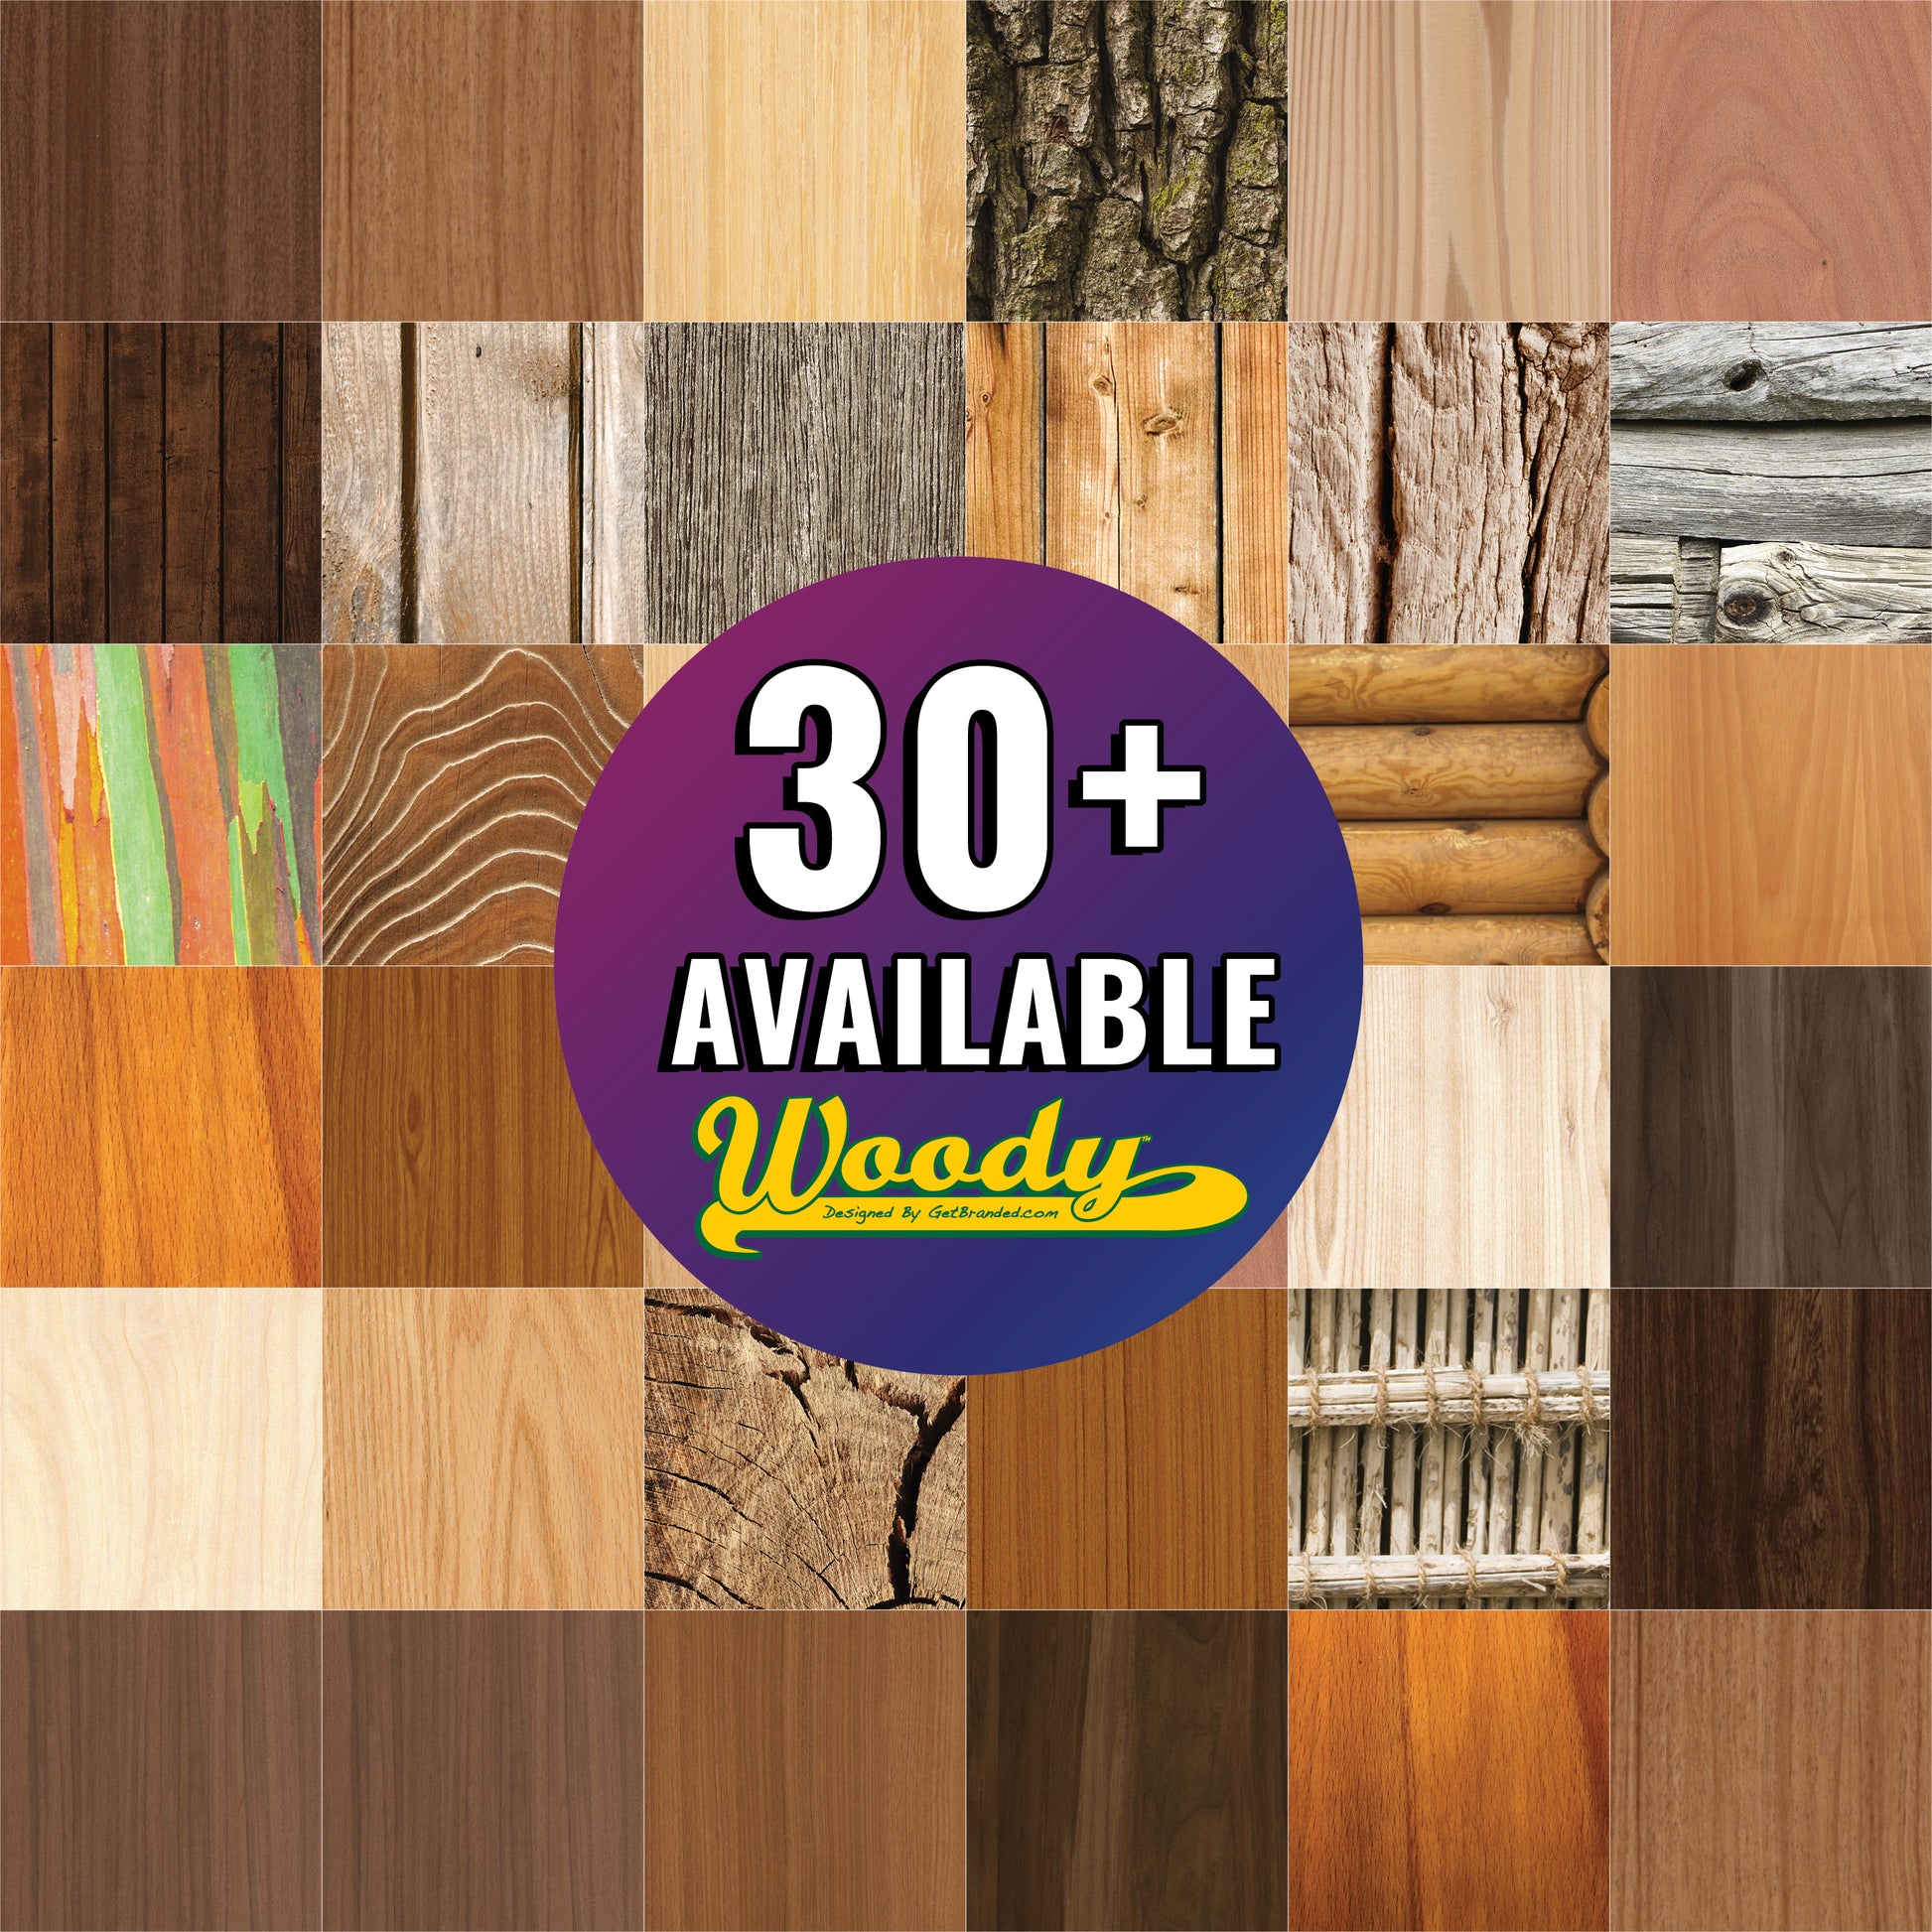 30+ Types of Wood Wraps Available. Get yours today!